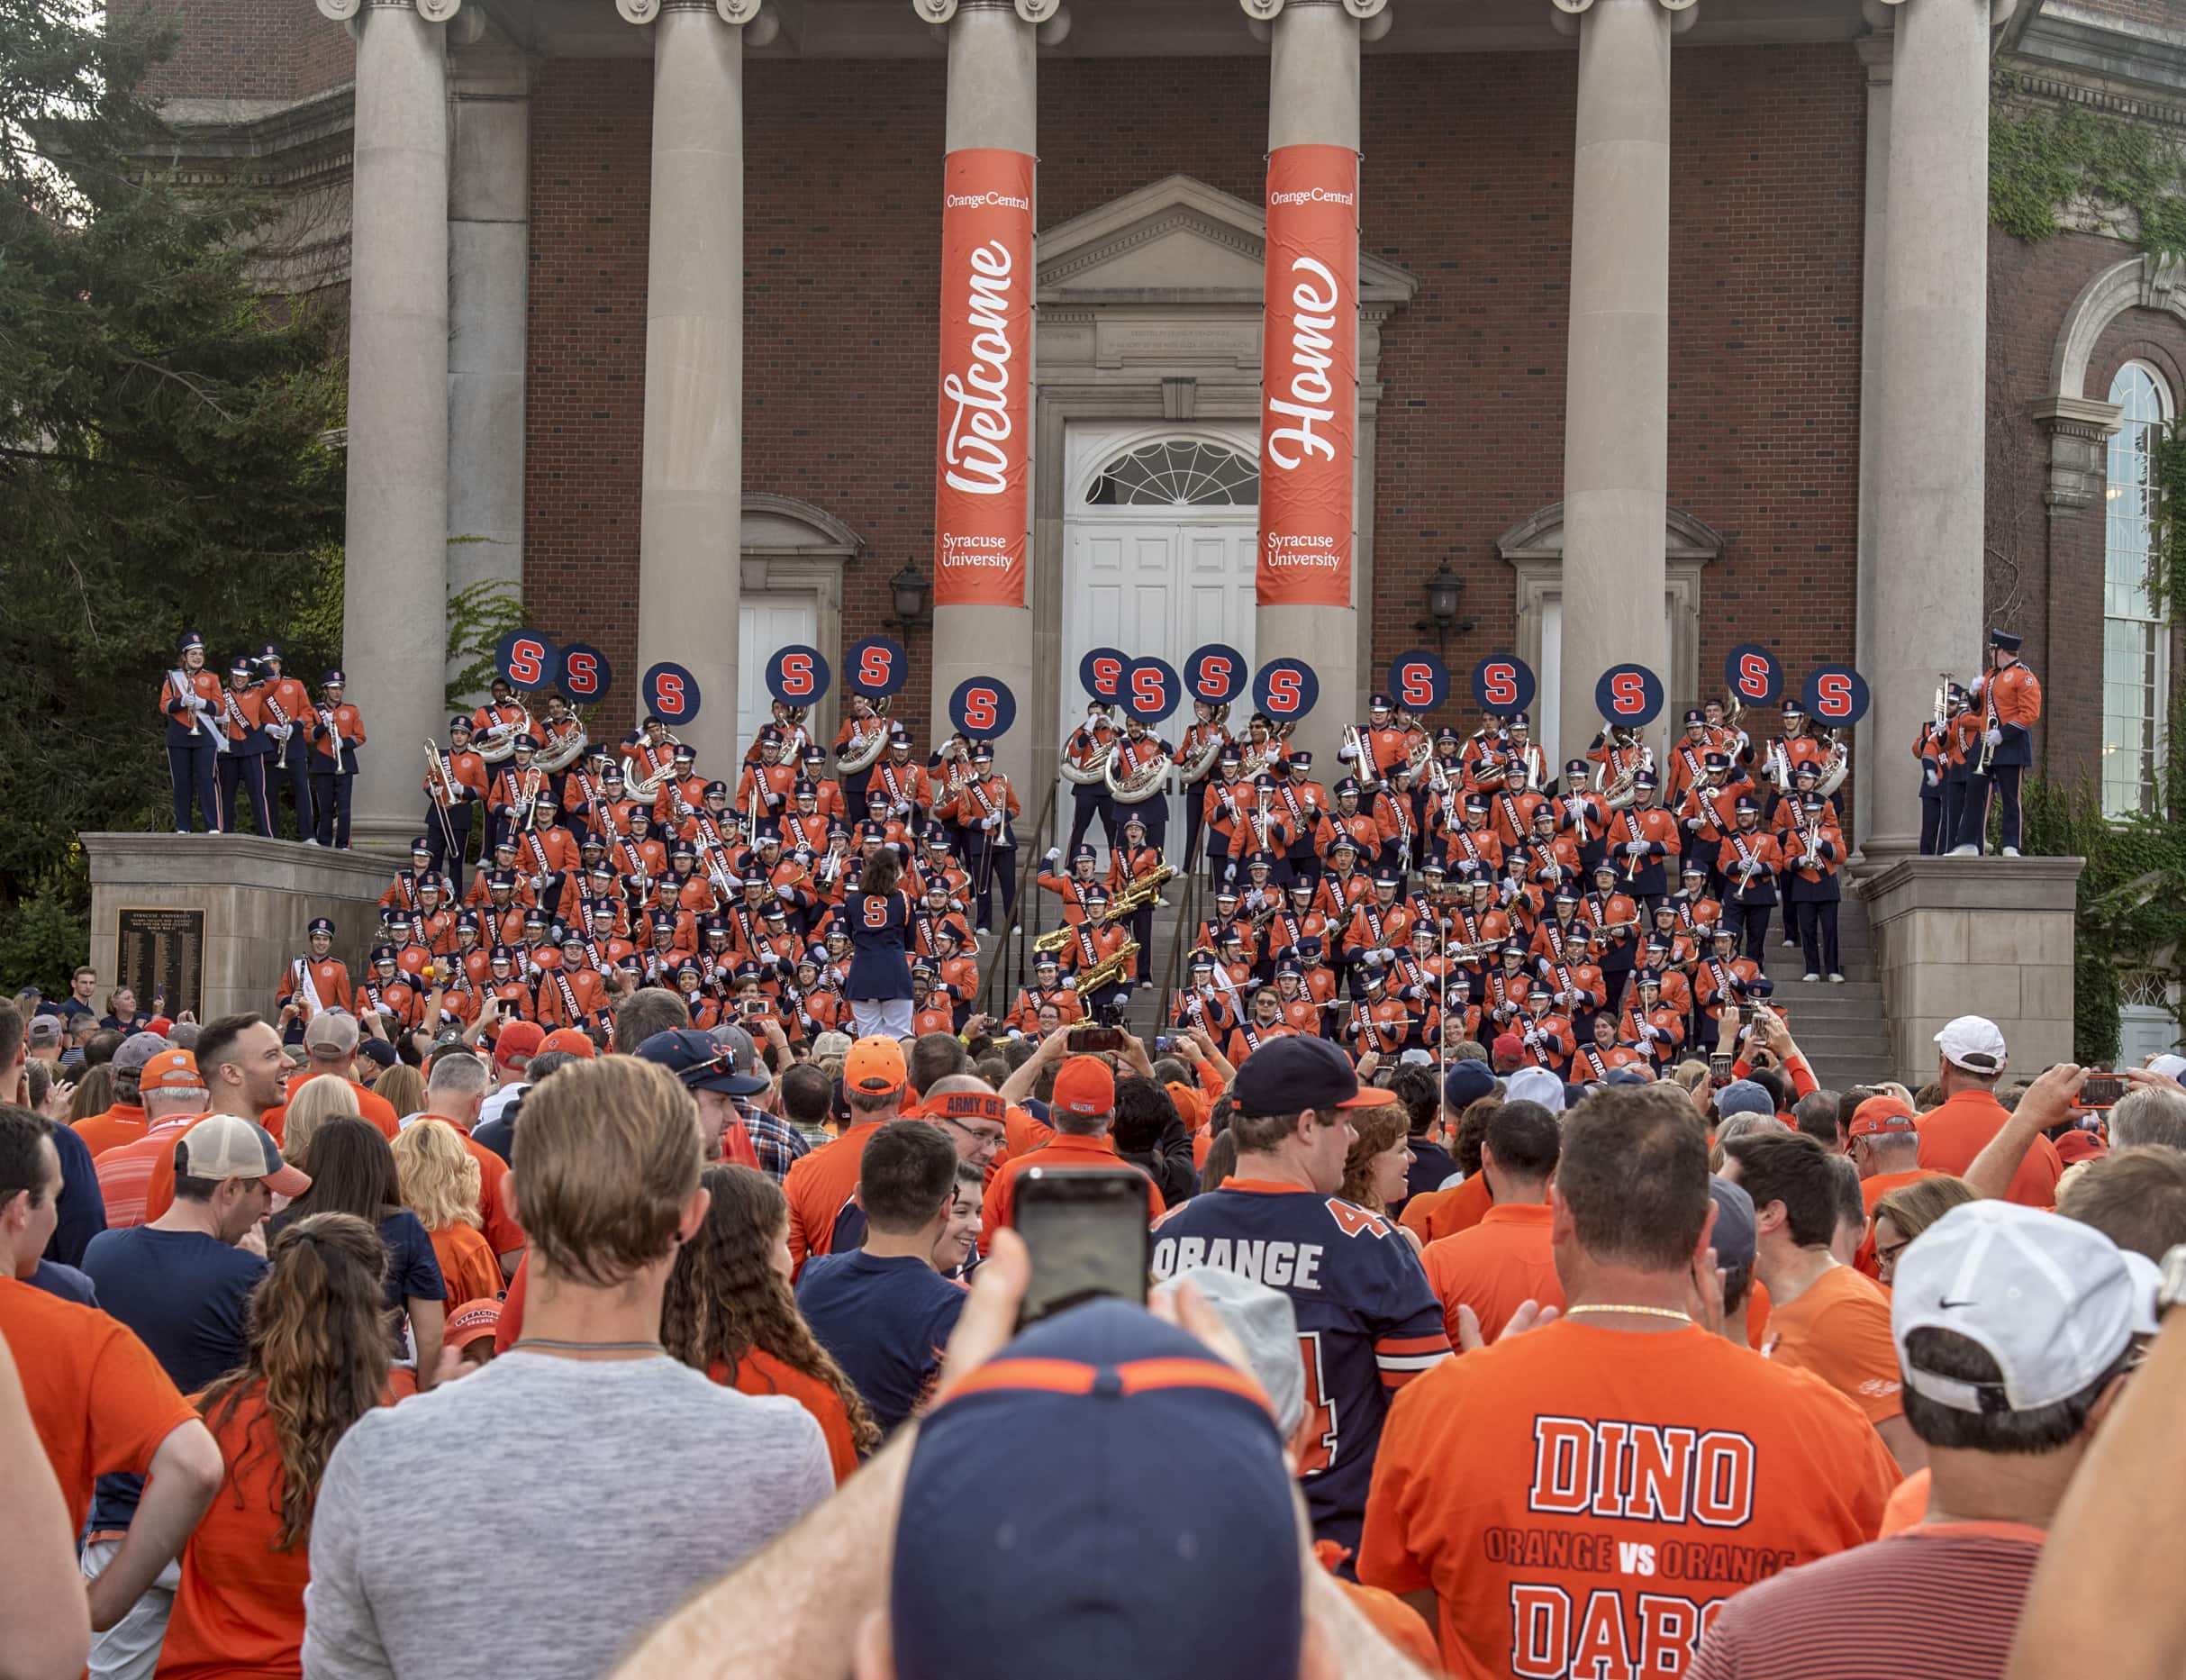 The Syracuse University Marching Band plays for fans, alumni, students and family members near the Orange Central Tailgate before the SU Oranges vs. Clemson Tigers football game. The event, hosted by the SU Alumni Association, is the first at-home tailgate of the 2019 football season.